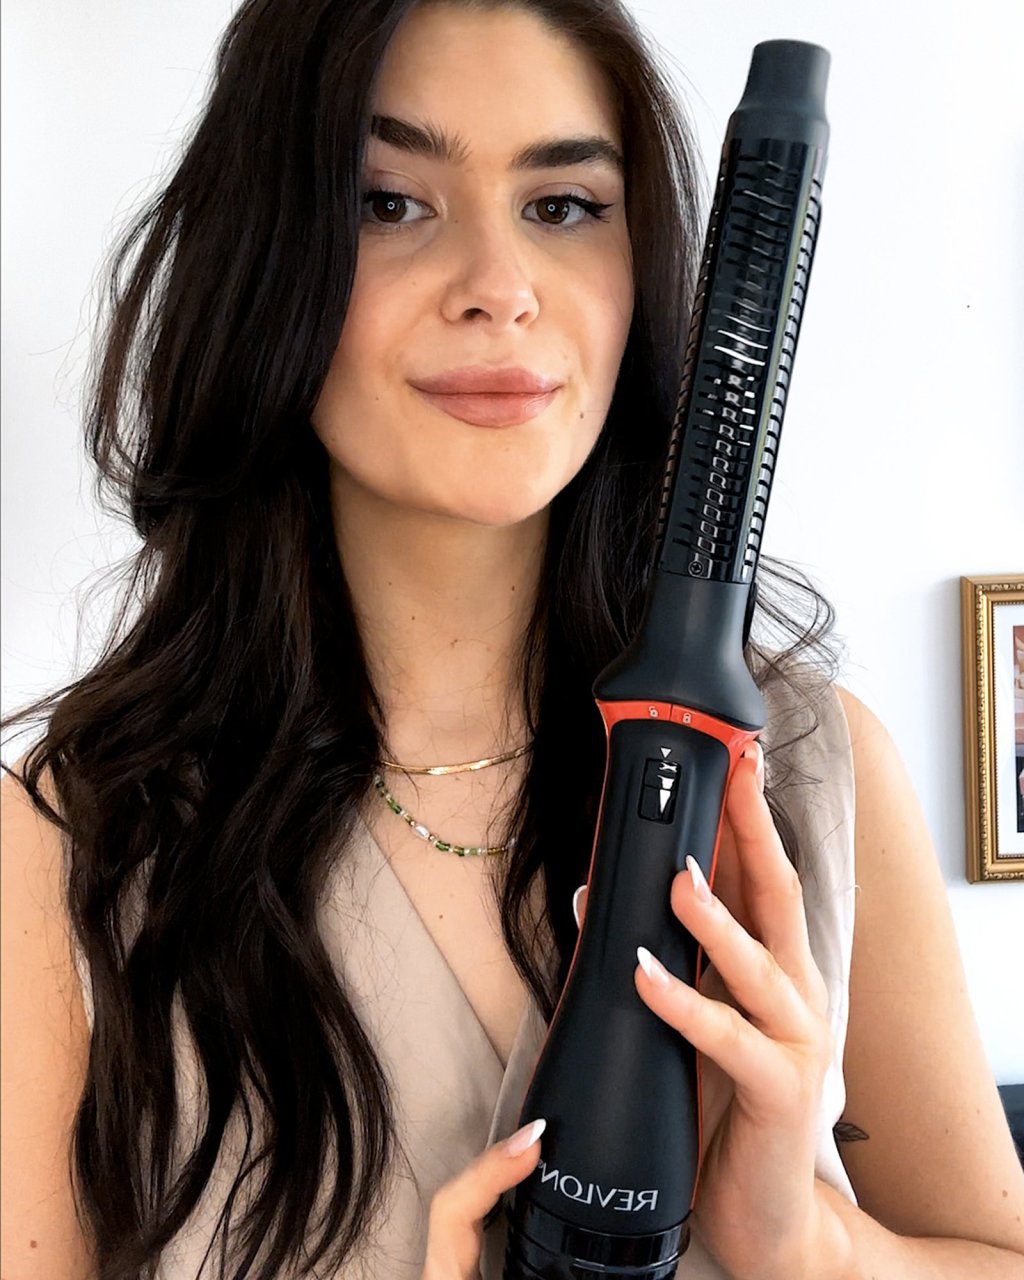 Revlon Blow-Dry Multi Styler Review 2023: I Tried The 3-in-1 Hair Tool